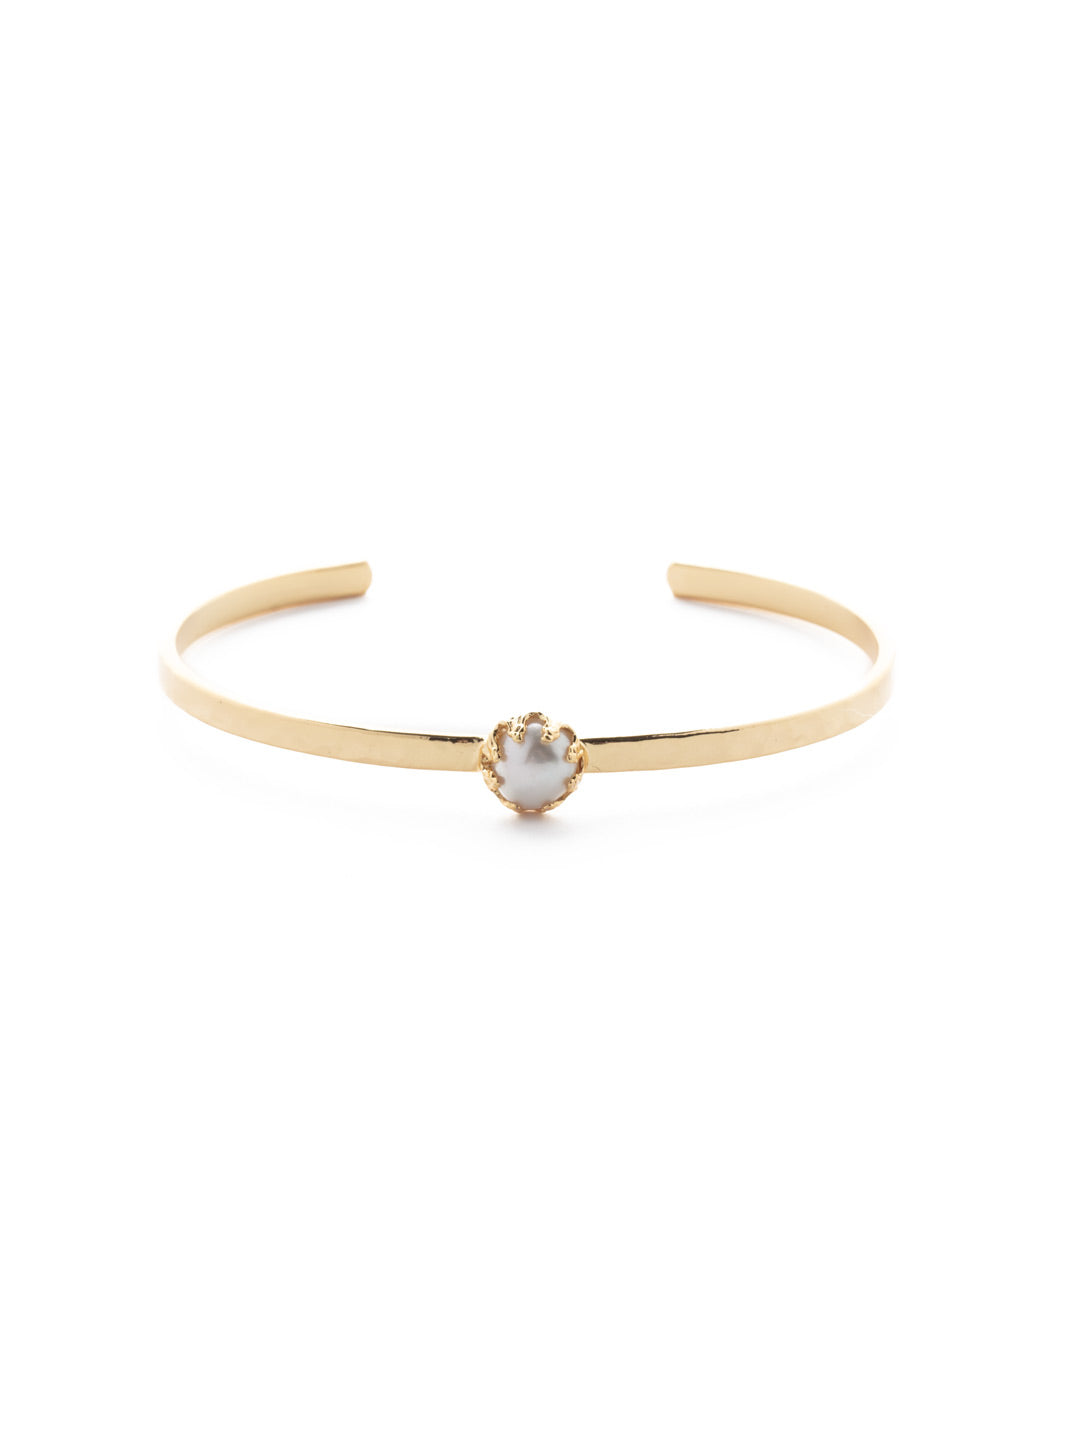 Aida Cuff Bracelet - BEV105BGCRY - <p>The Aida Cuff Bracelet features a single freshwater pearl on an adjustable cuff band. The dainty design makes it perfect for layering! From Sorrelli's Crystal collection in our Bright Gold-tone finish.</p>